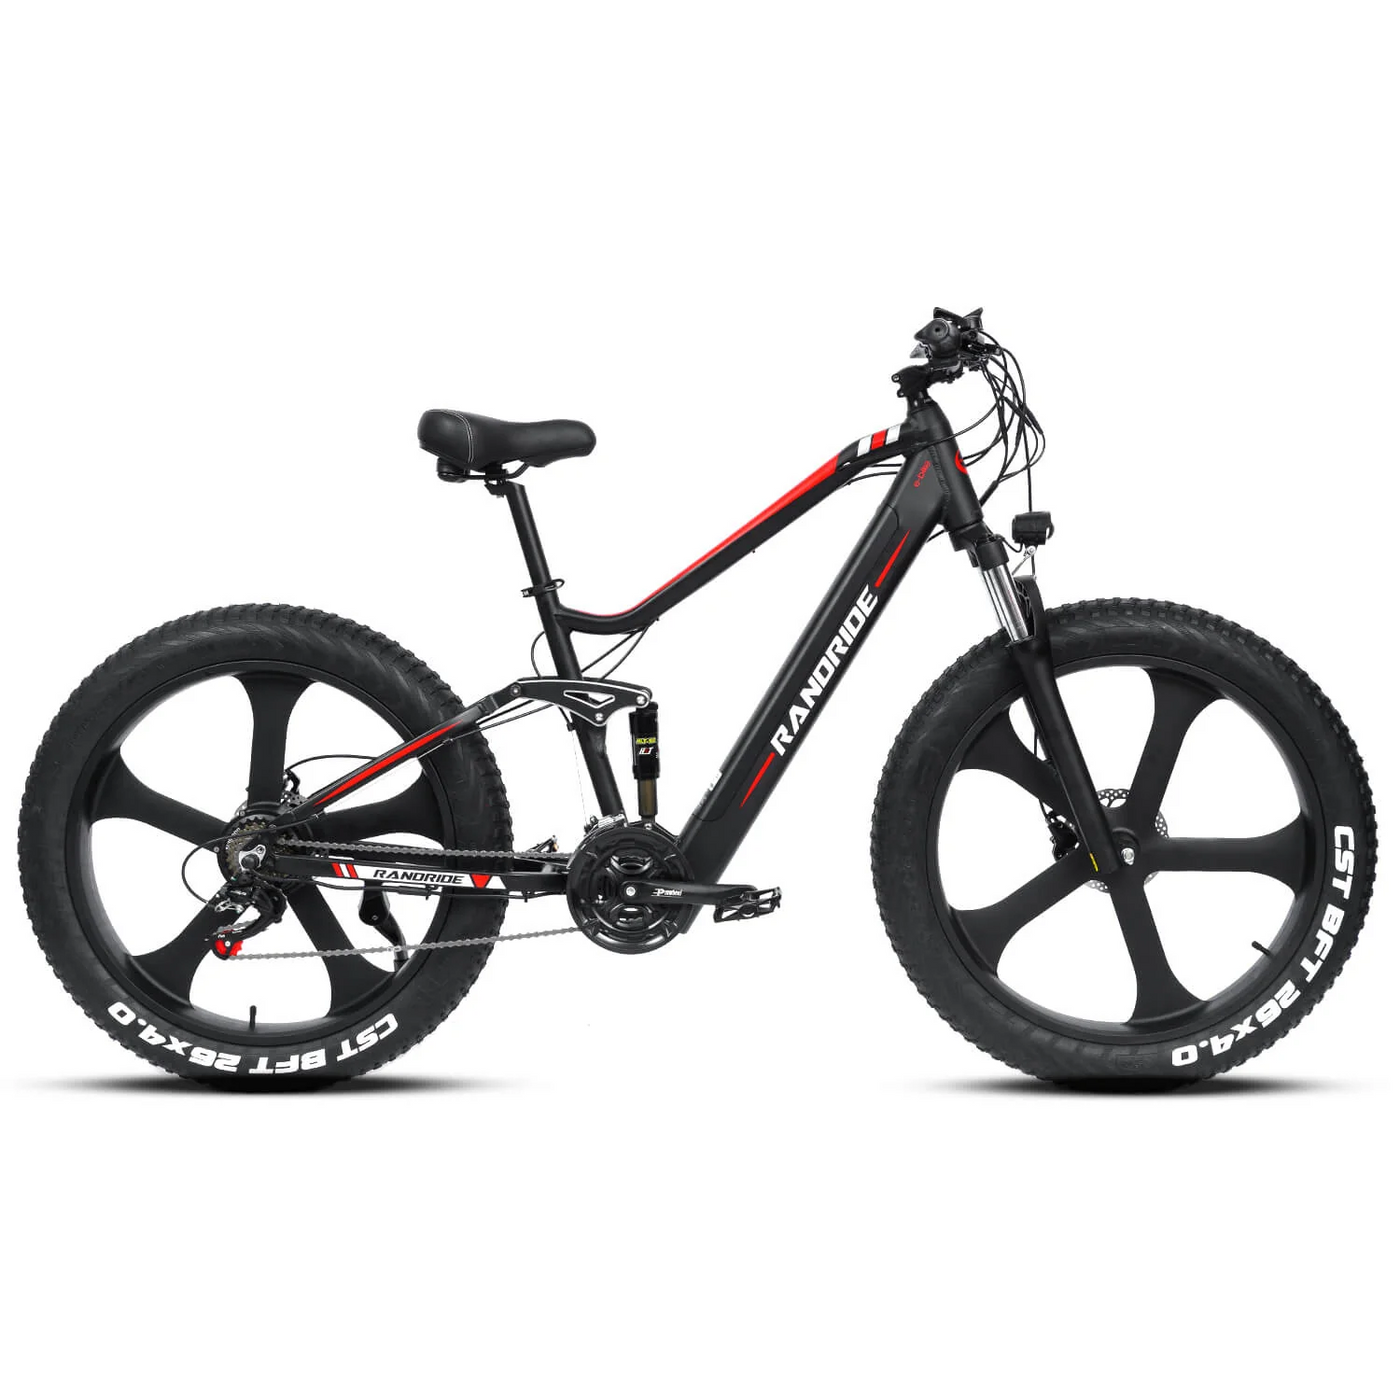 Freehold ownership of the Explorer Pro electric bike